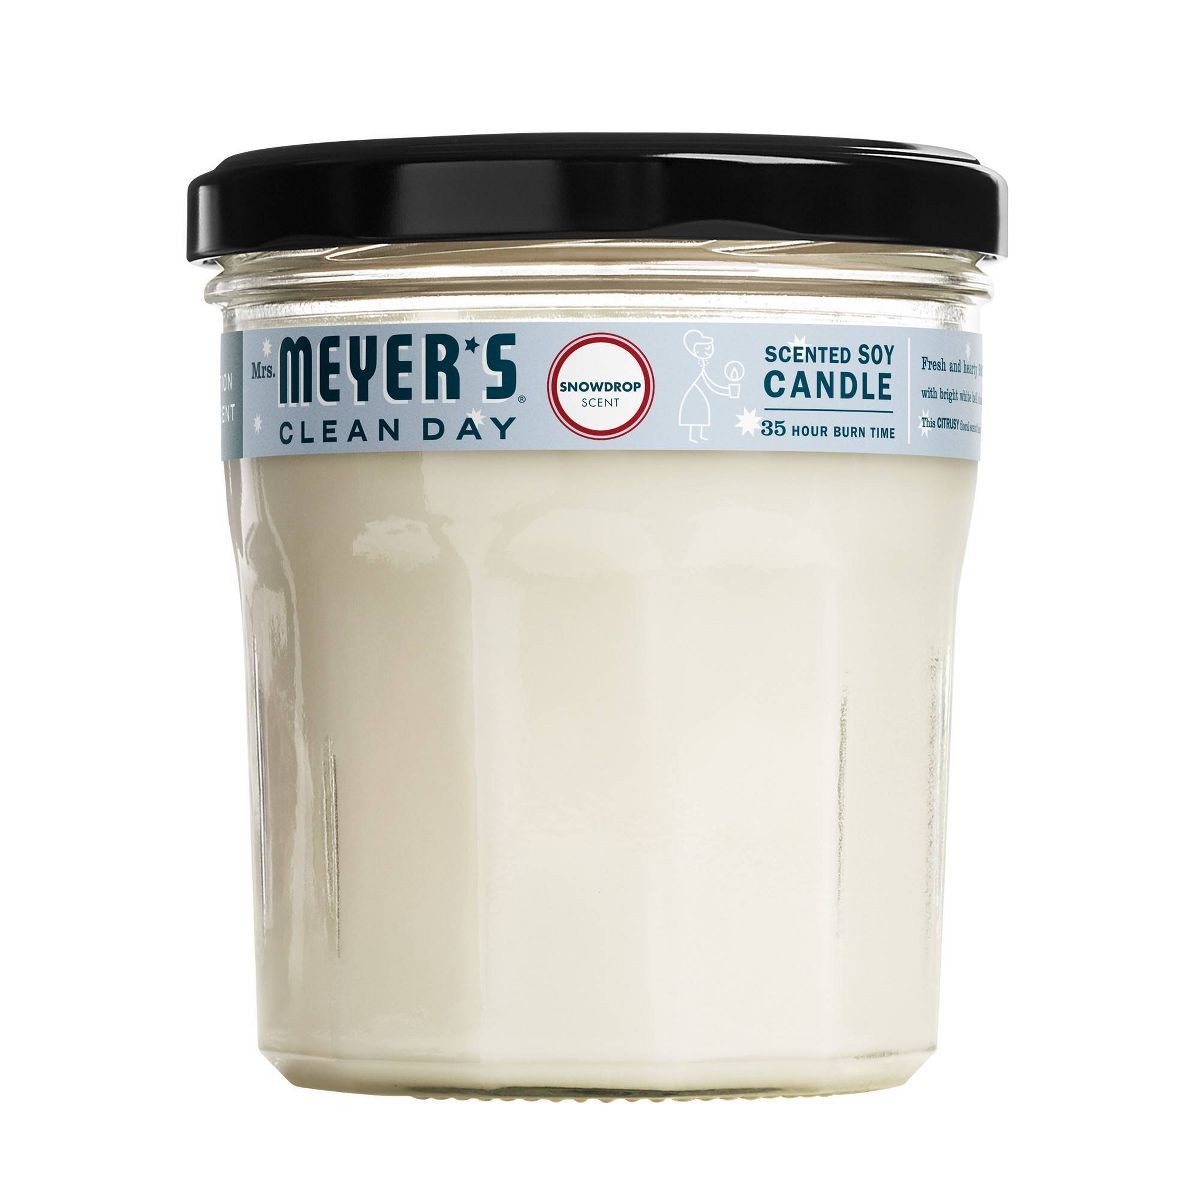 Mrs. Meyer's Clean Day Holiday Large Jar Candle - Snowdrop - 7.2oz | Target